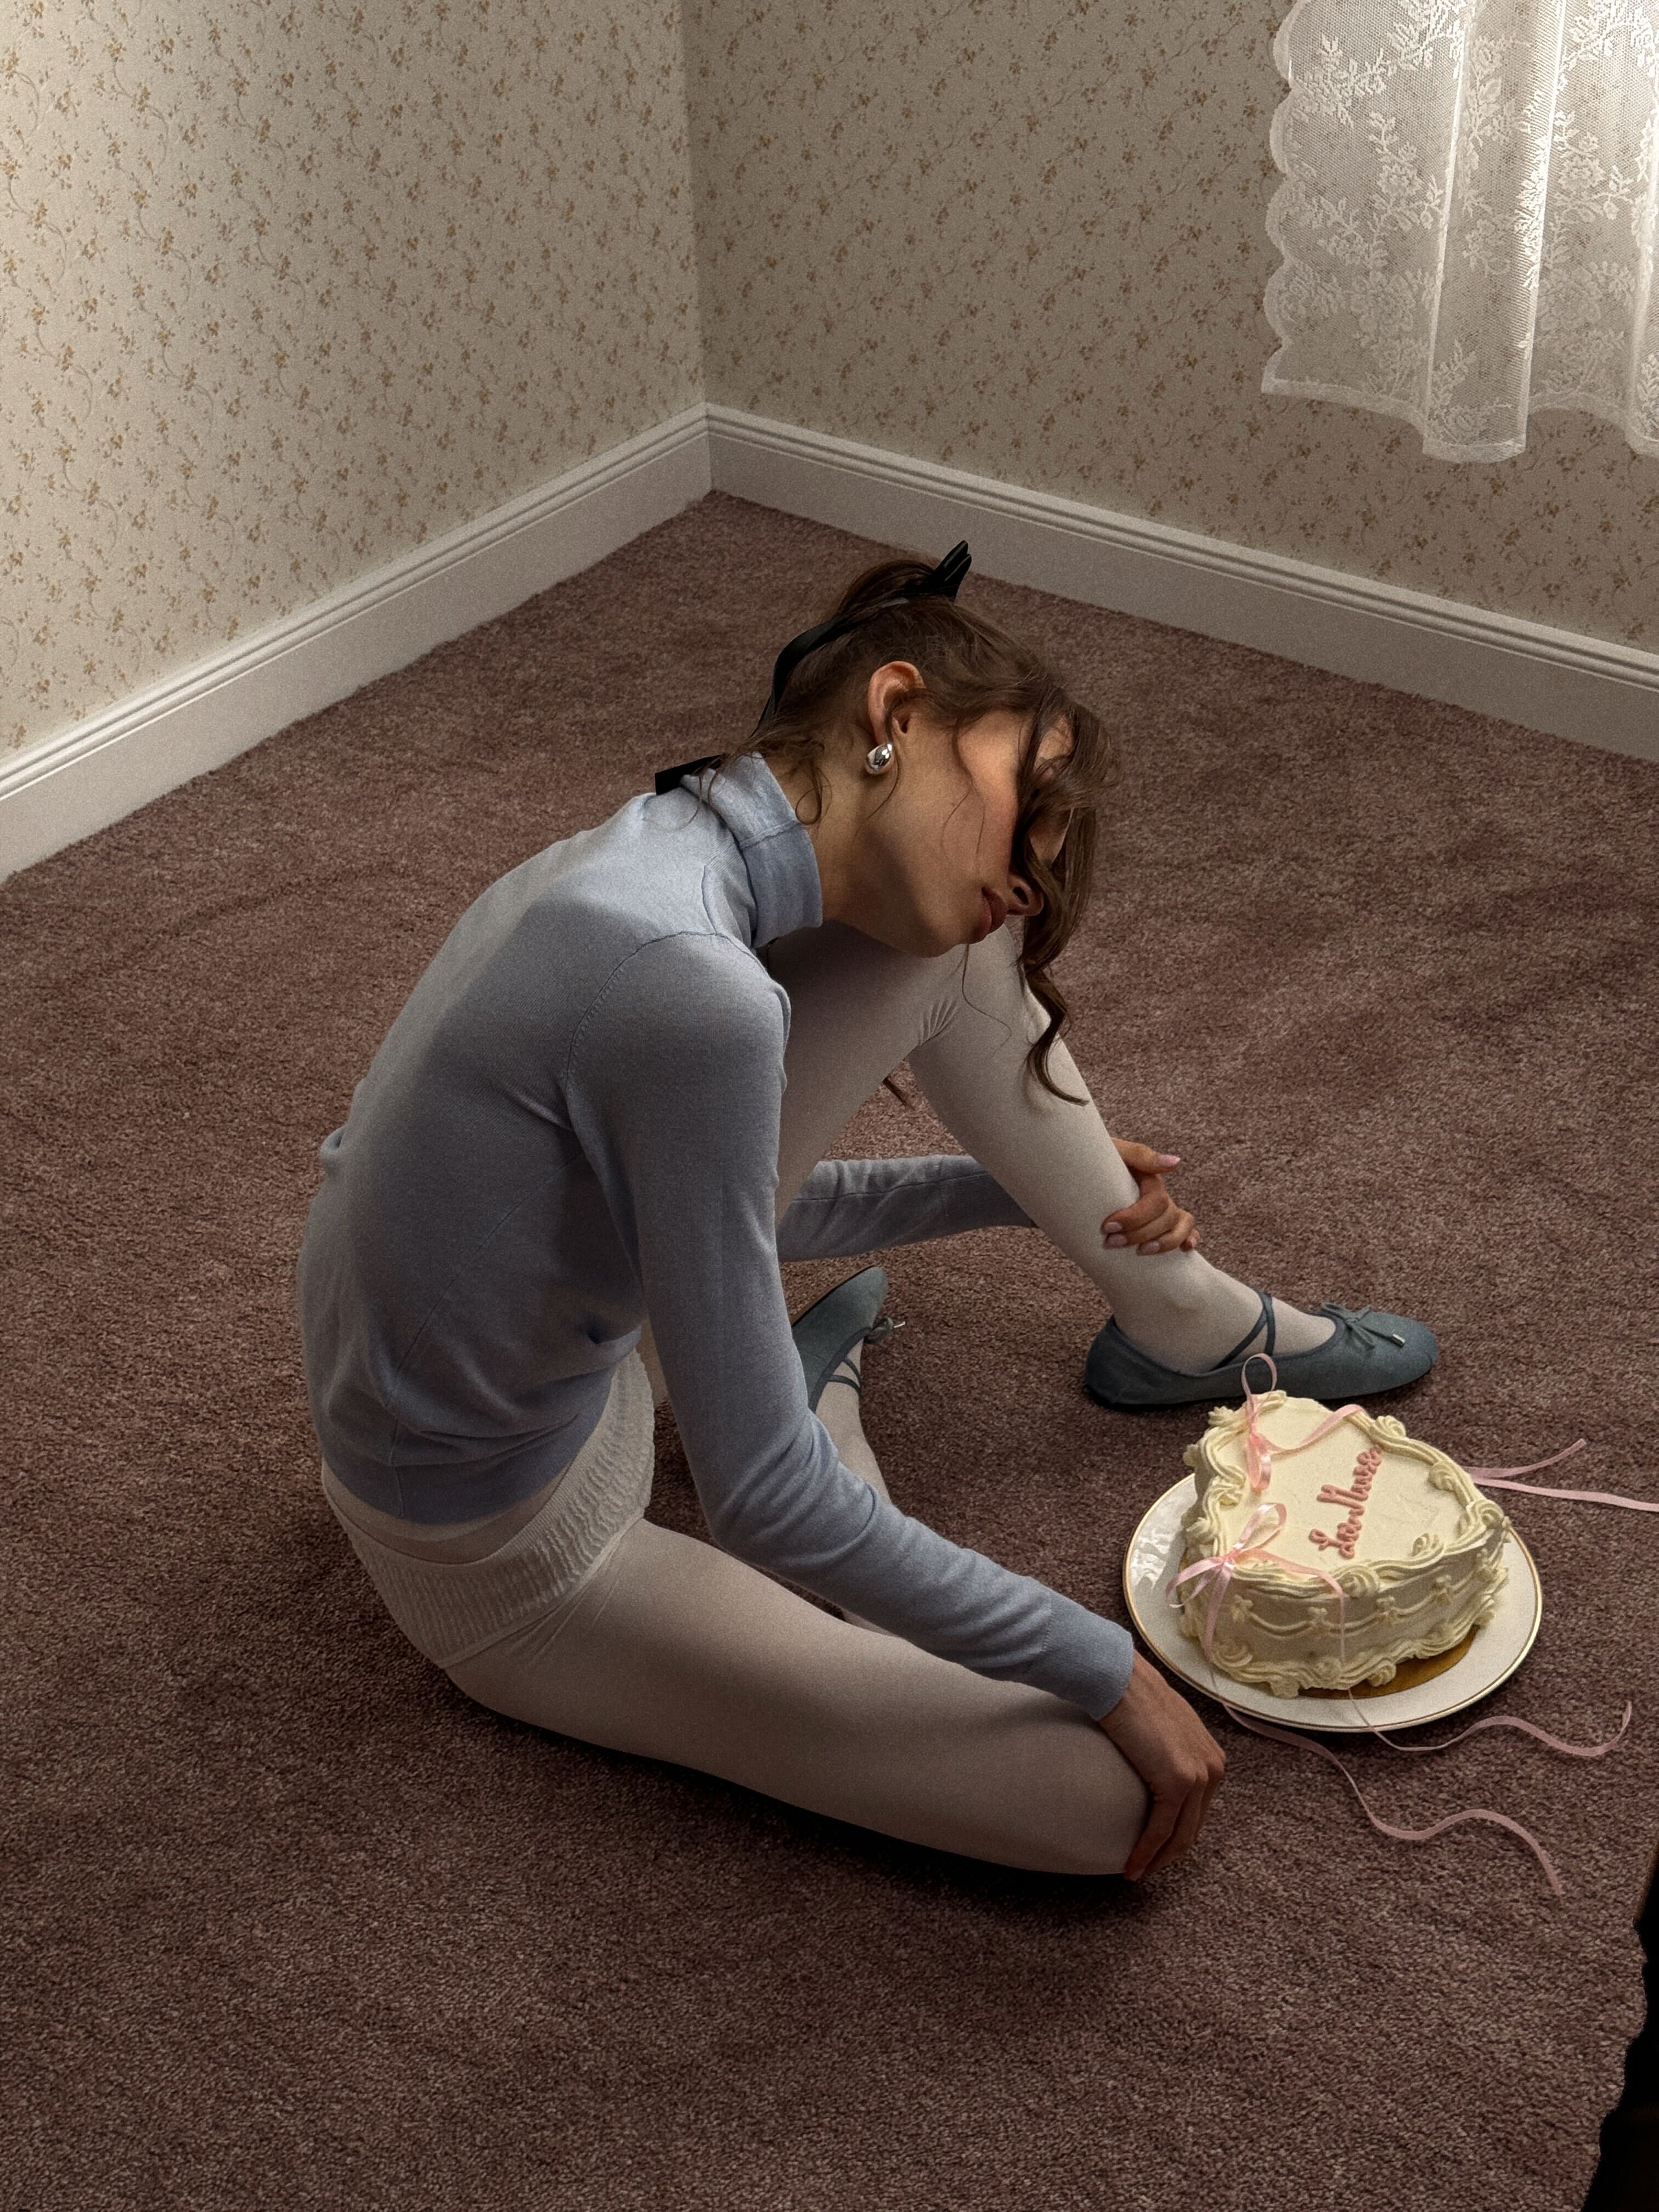 Dreamy woman sitting on floor next to a delicious cake